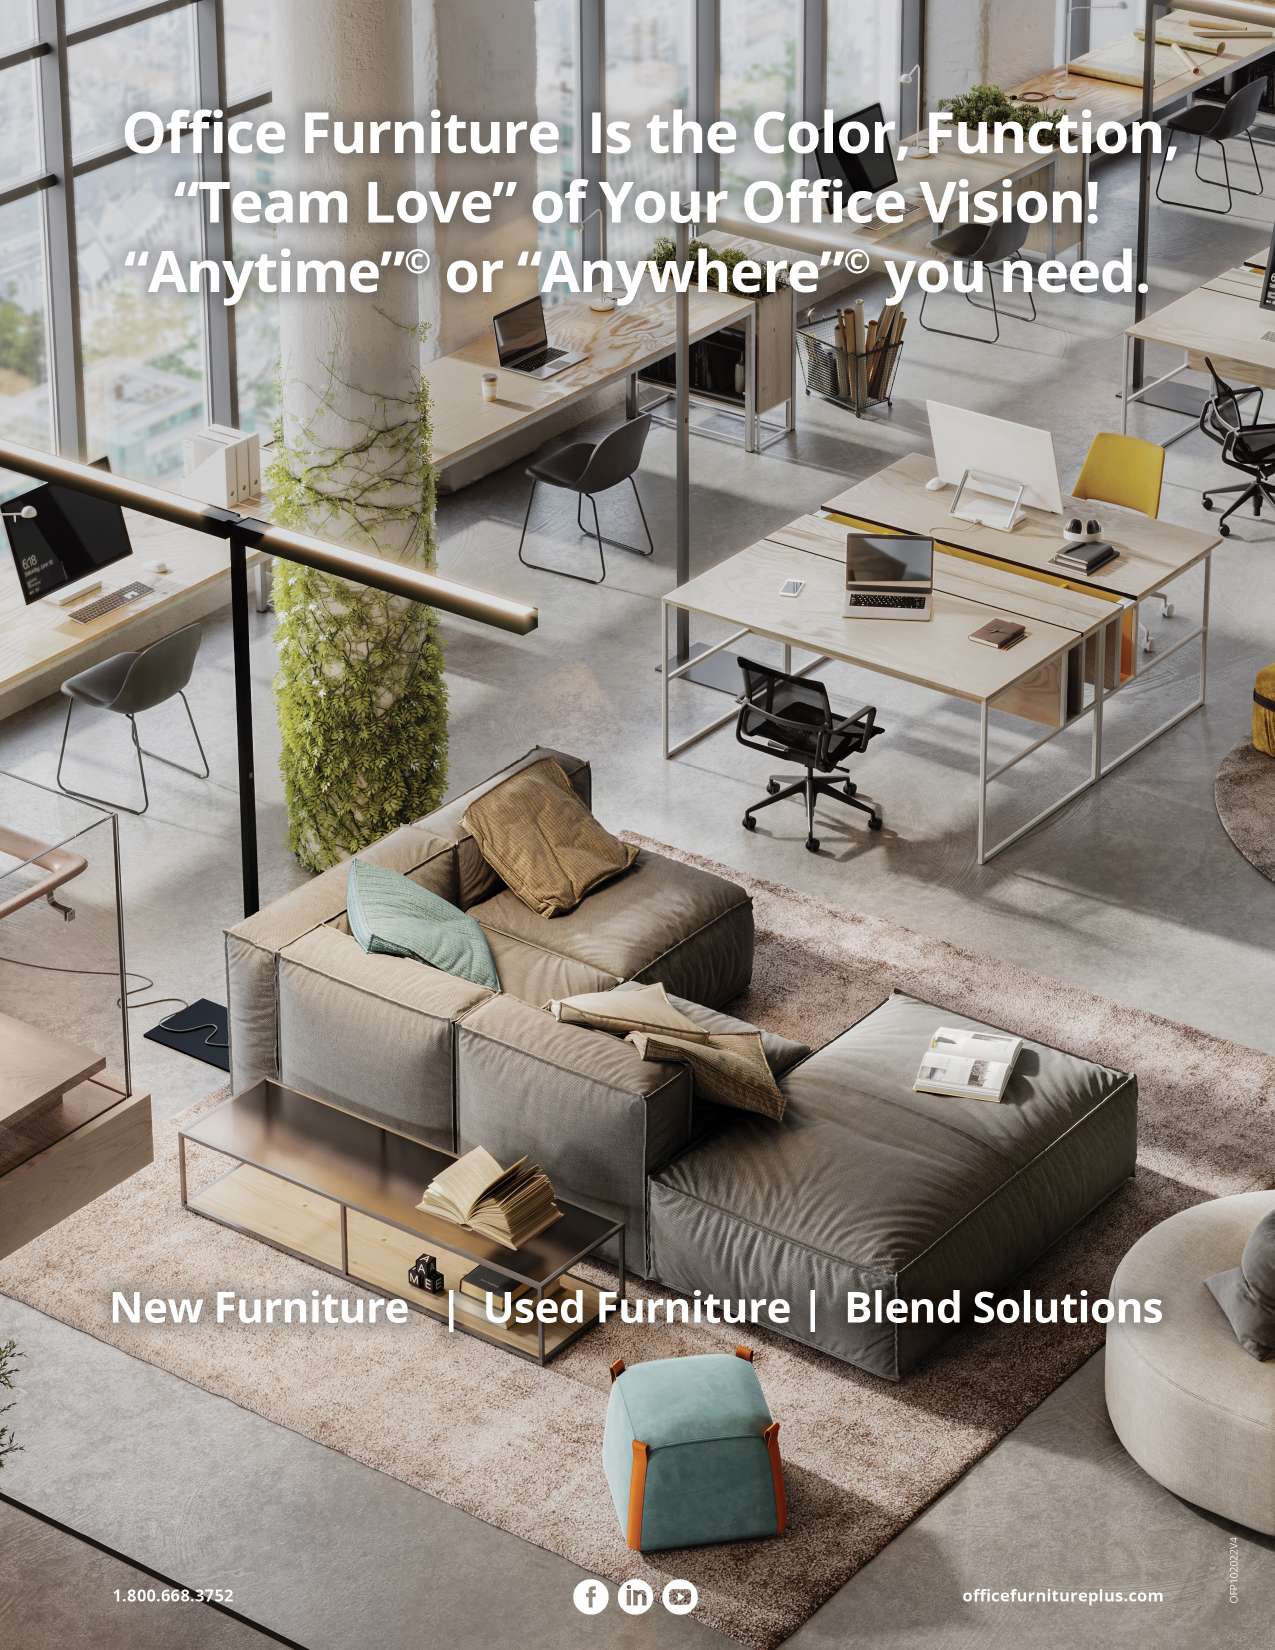 Brochure-Office-Furniture-Plus-Single-Pages-OFP